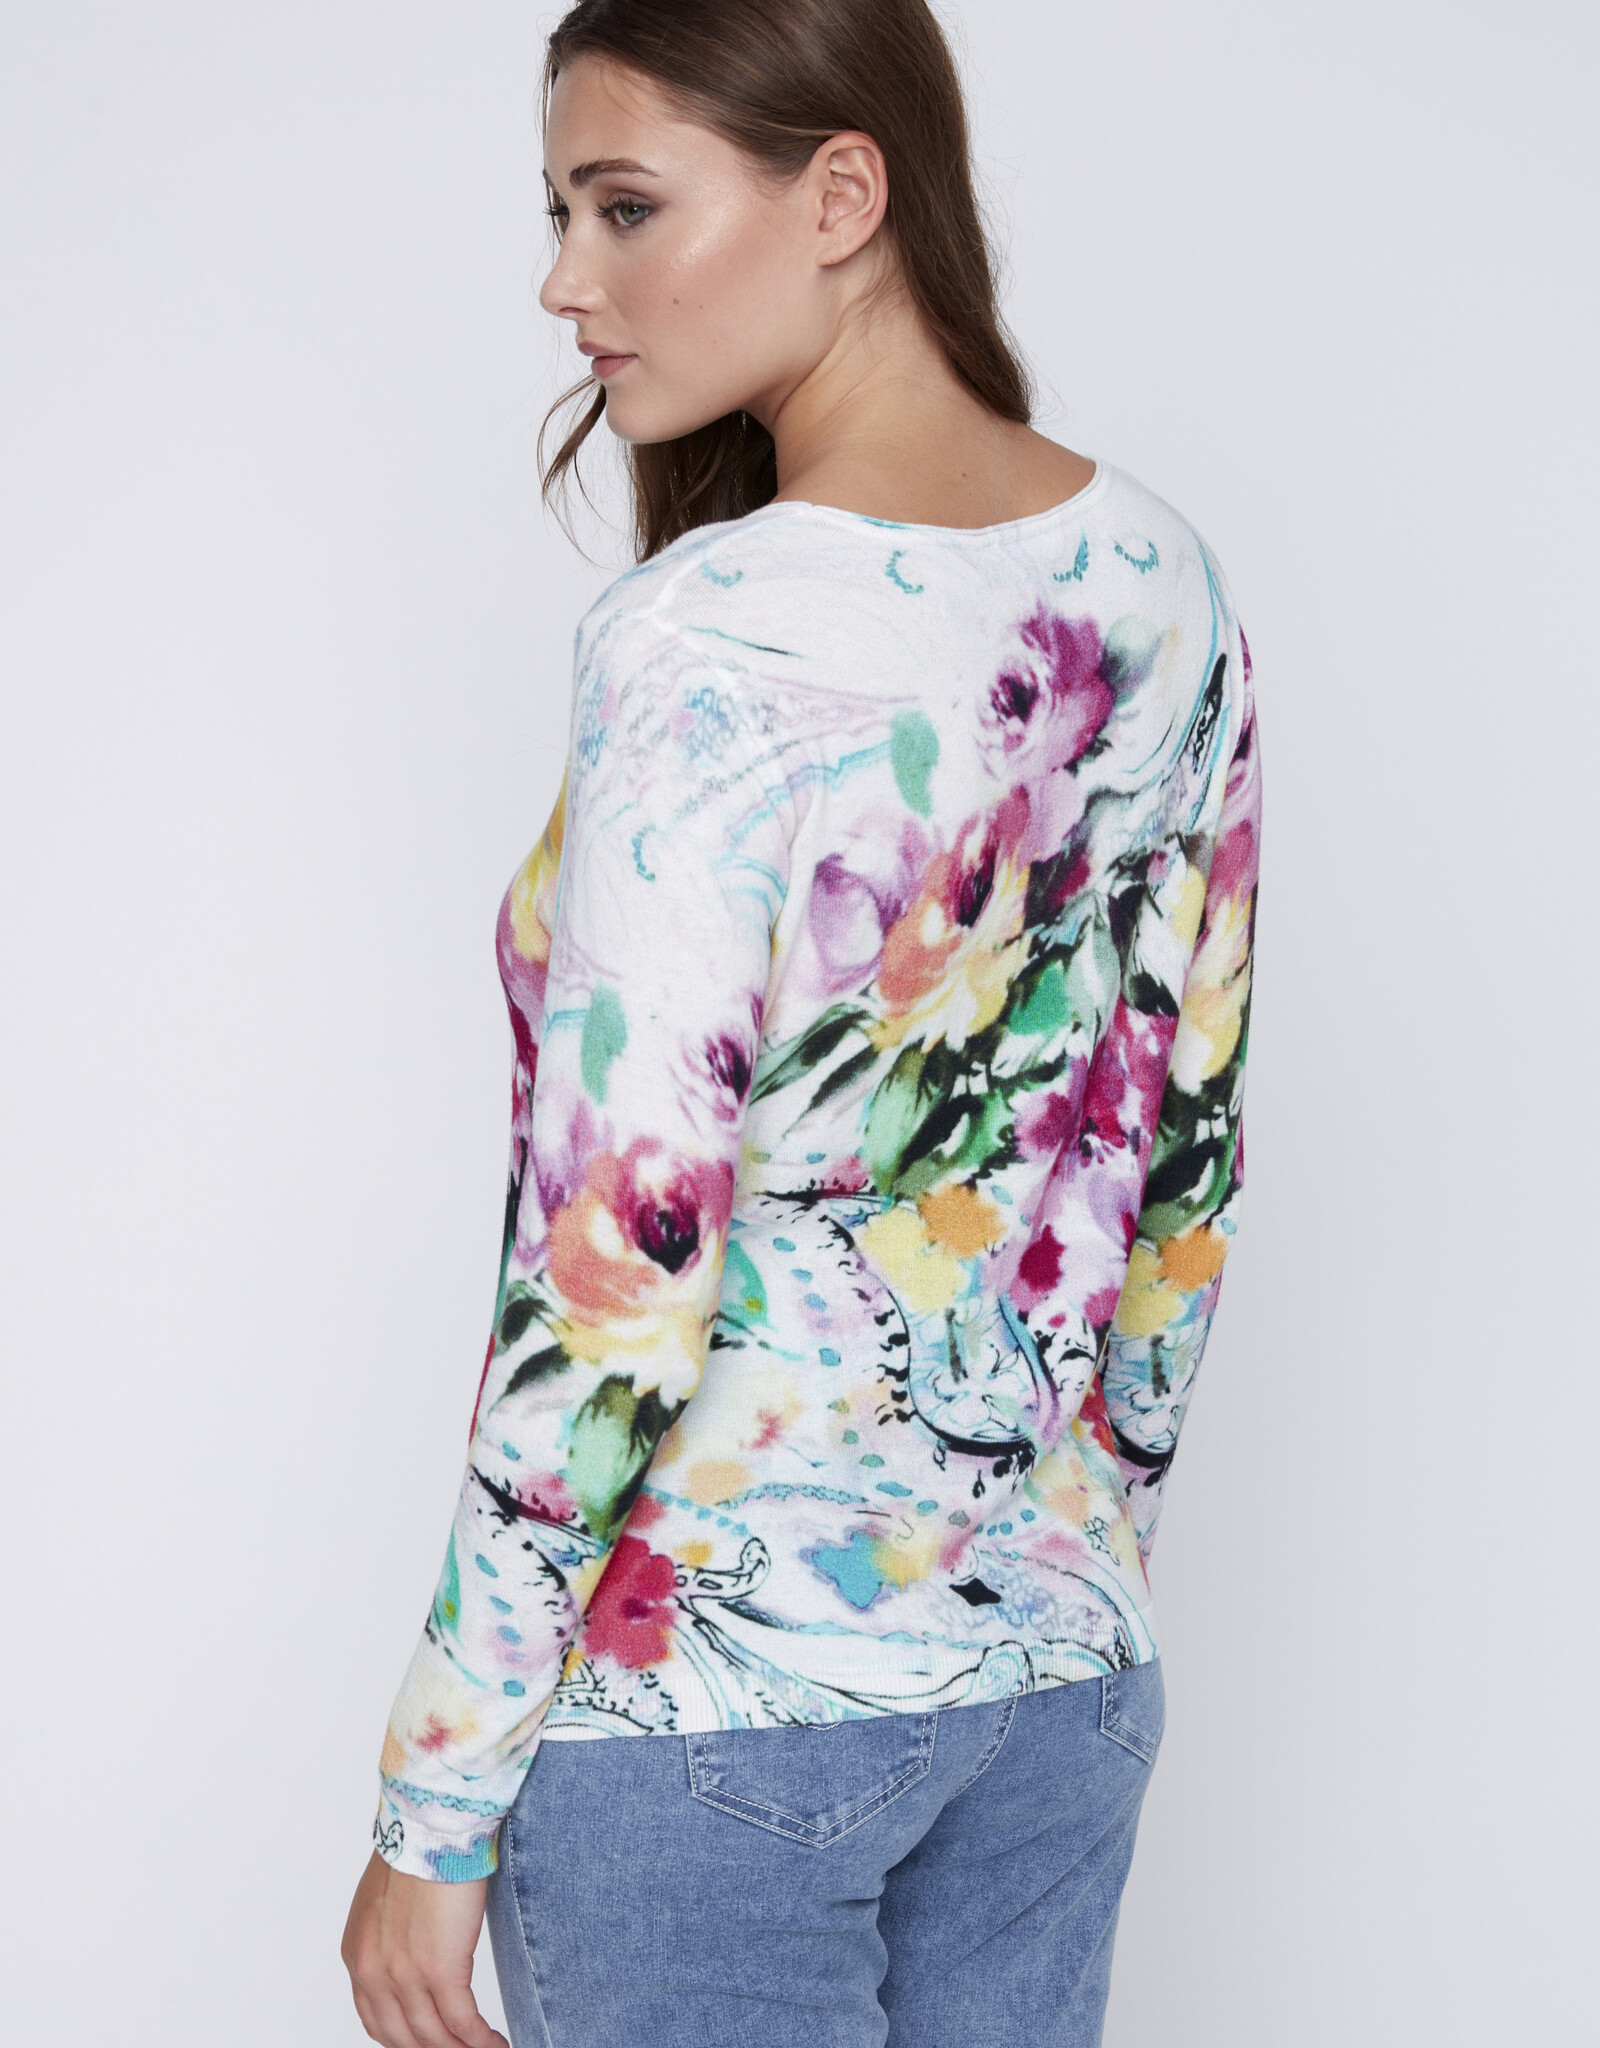 CYC Floral Printed Knit Top